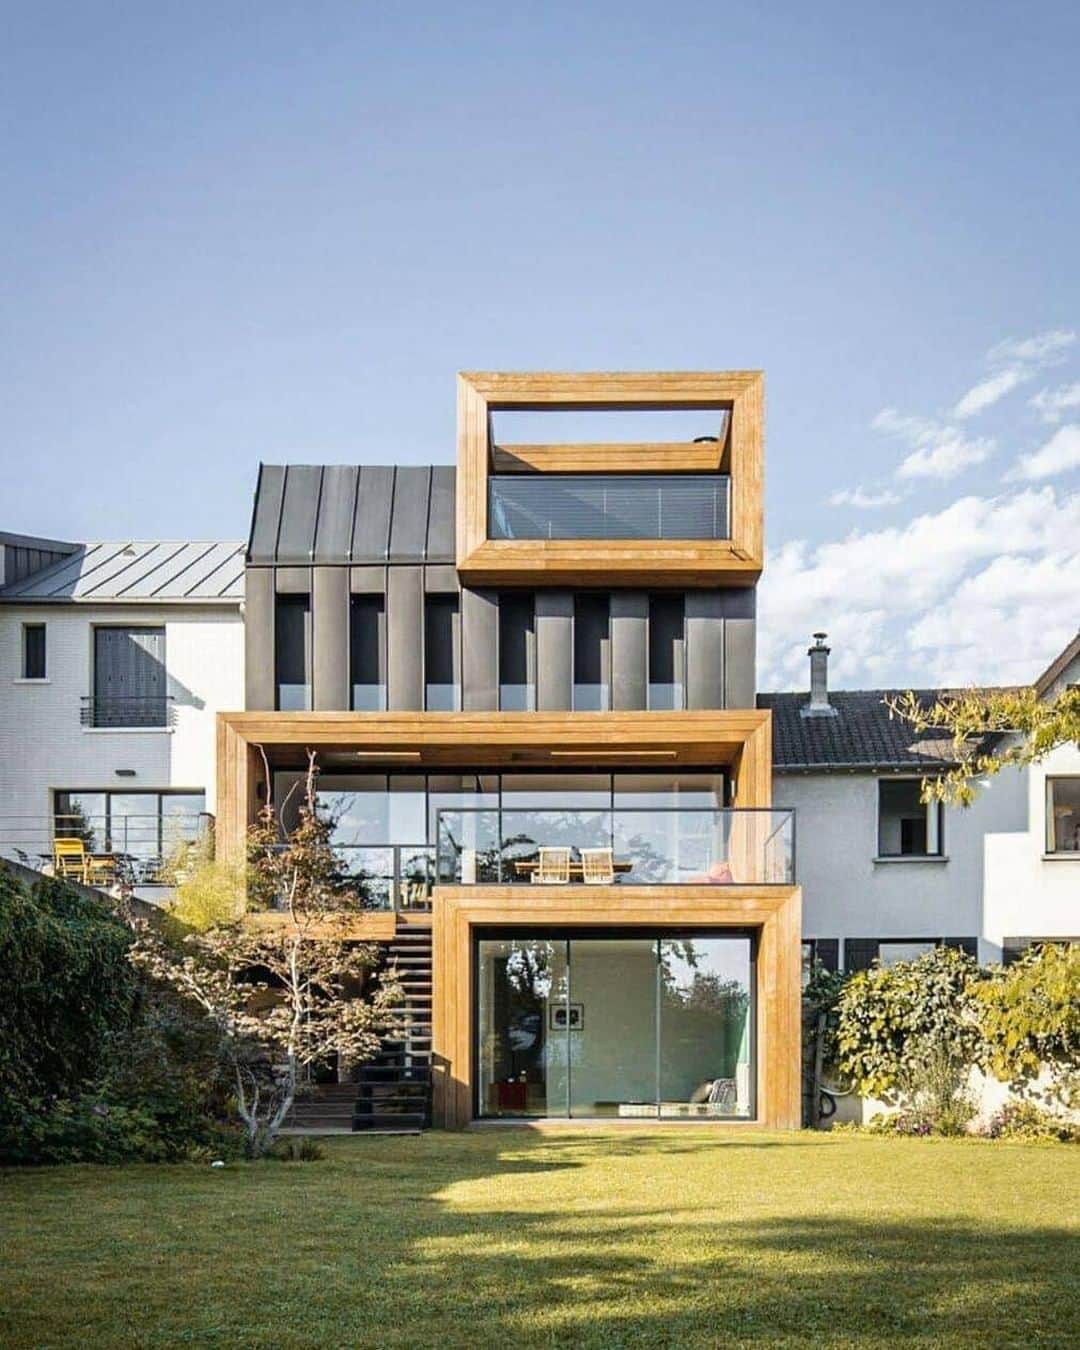 Architecture - Housesさんのインスタグラム写真 - (Architecture - HousesInstagram)「⁣ 𝐑𝐞𝐦𝐨𝐝𝐞𝐥𝐢𝐧𝐠 𝐩𝐫𝐨𝐣𝐞𝐜𝐭 𝐢𝐧 #𝐅𝐫𝐚𝐧𝐜𝐞⁣  @skp_architecture had a challenge: they had to remodel a house from 1950s / 1960s spatially and thermally and give it a more contemporary architecture. The part of the wooden roof was removed in order to change its size and create an elevation. On the street side, a one-storey extension was placed in the extension of the existing garage in order to enlarge the latter. ⁣ What do you think about it? Tag an #architecture lover 💙⁣ _____⁣⁣⁣⁣⁣⁣⁣⁣⁣⁣⁣⁣⁣⁣⁣⁣⁣⁣⁣⁣⁣⁣⁣⁣⁣⁣⁣⁣⁣⁣⁣⁣⁣⁣⁣ 📐 @skp_architecture⁣ 📍Issy-les-Moulineaux, France⁣ #archidesignhome⁣ _____⁣⁣⁣⁣⁣⁣⁣⁣⁣⁣⁣⁣⁣⁣⁣⁣⁣⁣⁣⁣⁣⁣⁣⁣⁣⁣⁣⁣⁣⁣⁣⁣⁣⁣⁣ #design #architecture #architect #arquitectura #luxury #architettura #interiordesign #archilovers #home #house  #architecturephotography #amazingarchitecture⁣⁣ #realestate #photooftheday #construction #archilovers #home #house ‎#amazing #picoftheday #archigram #ModernArchitect⁣ ⁣ ⁣」1月12日 0時00分 - _archidesignhome_